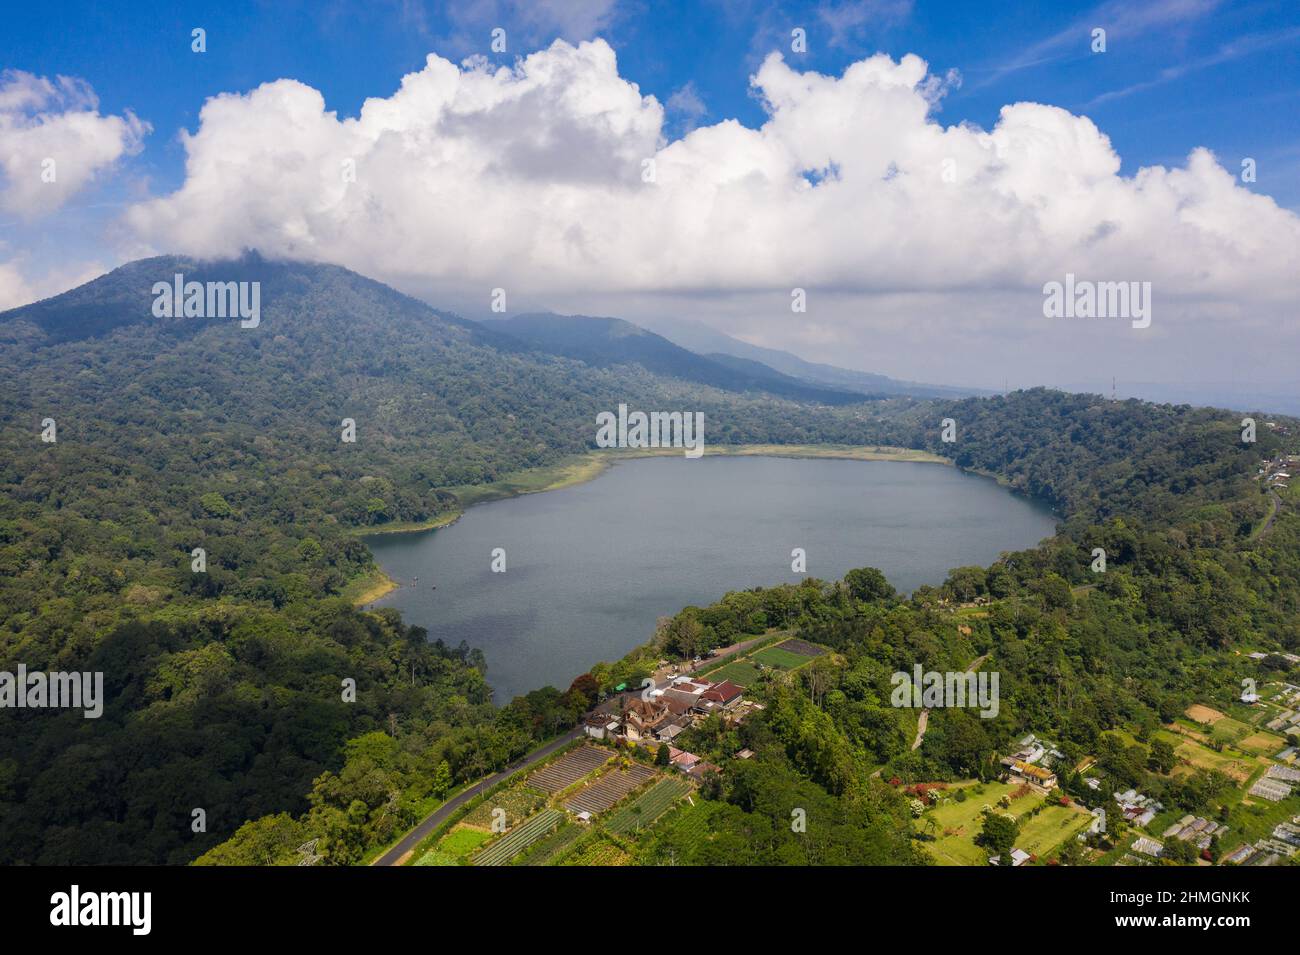 Aerial view of the lake Tamblingan in the Bali Highlands in Indonesia on a sunny day in Southeast Asia Stock Photo